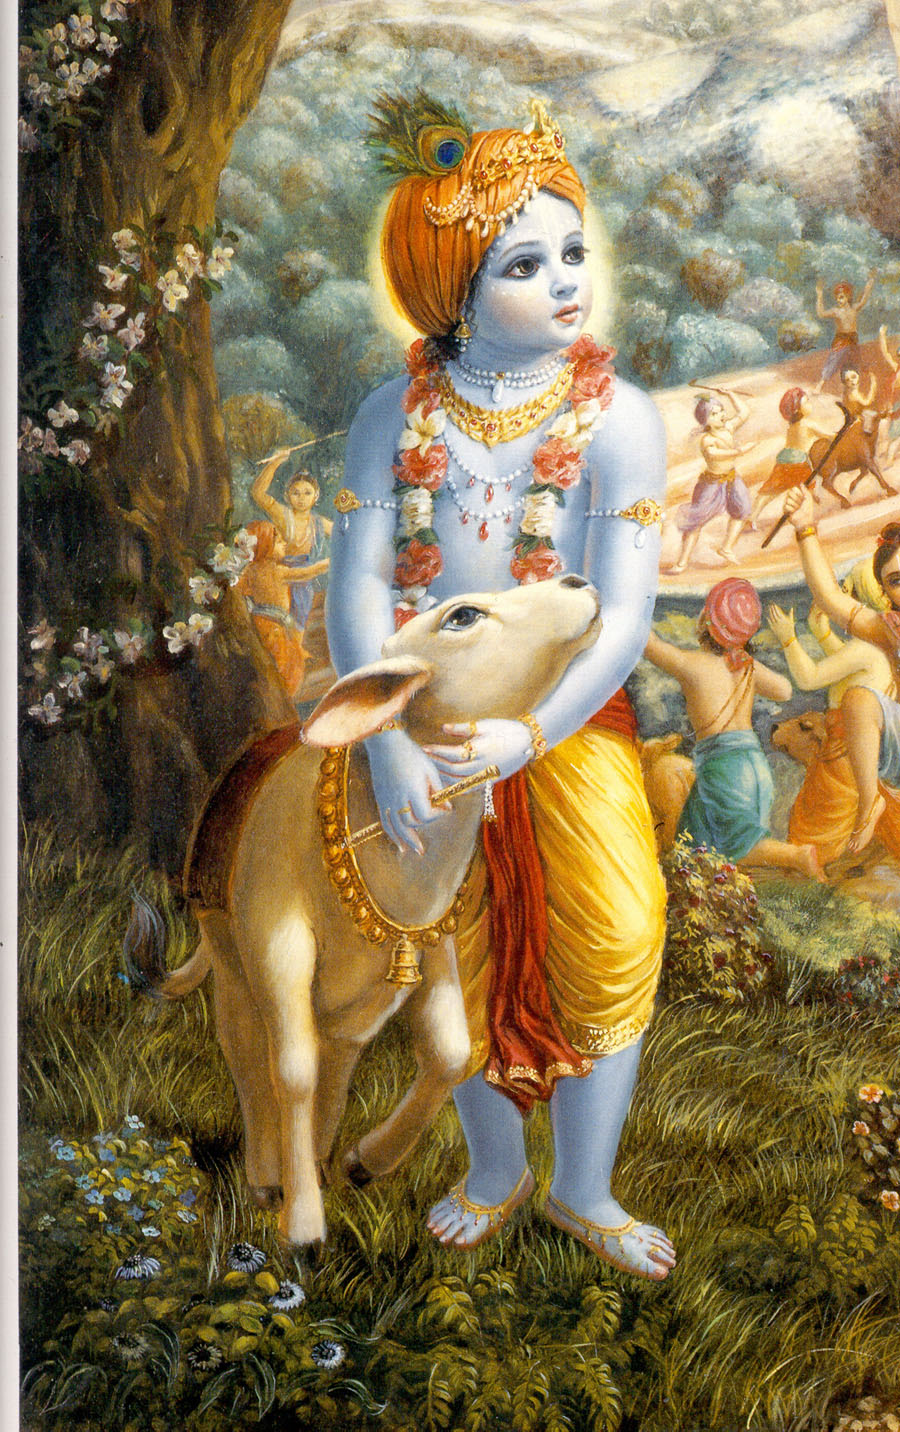 My prayer to Lord Krishna on his appearance day, Janmashtami ...